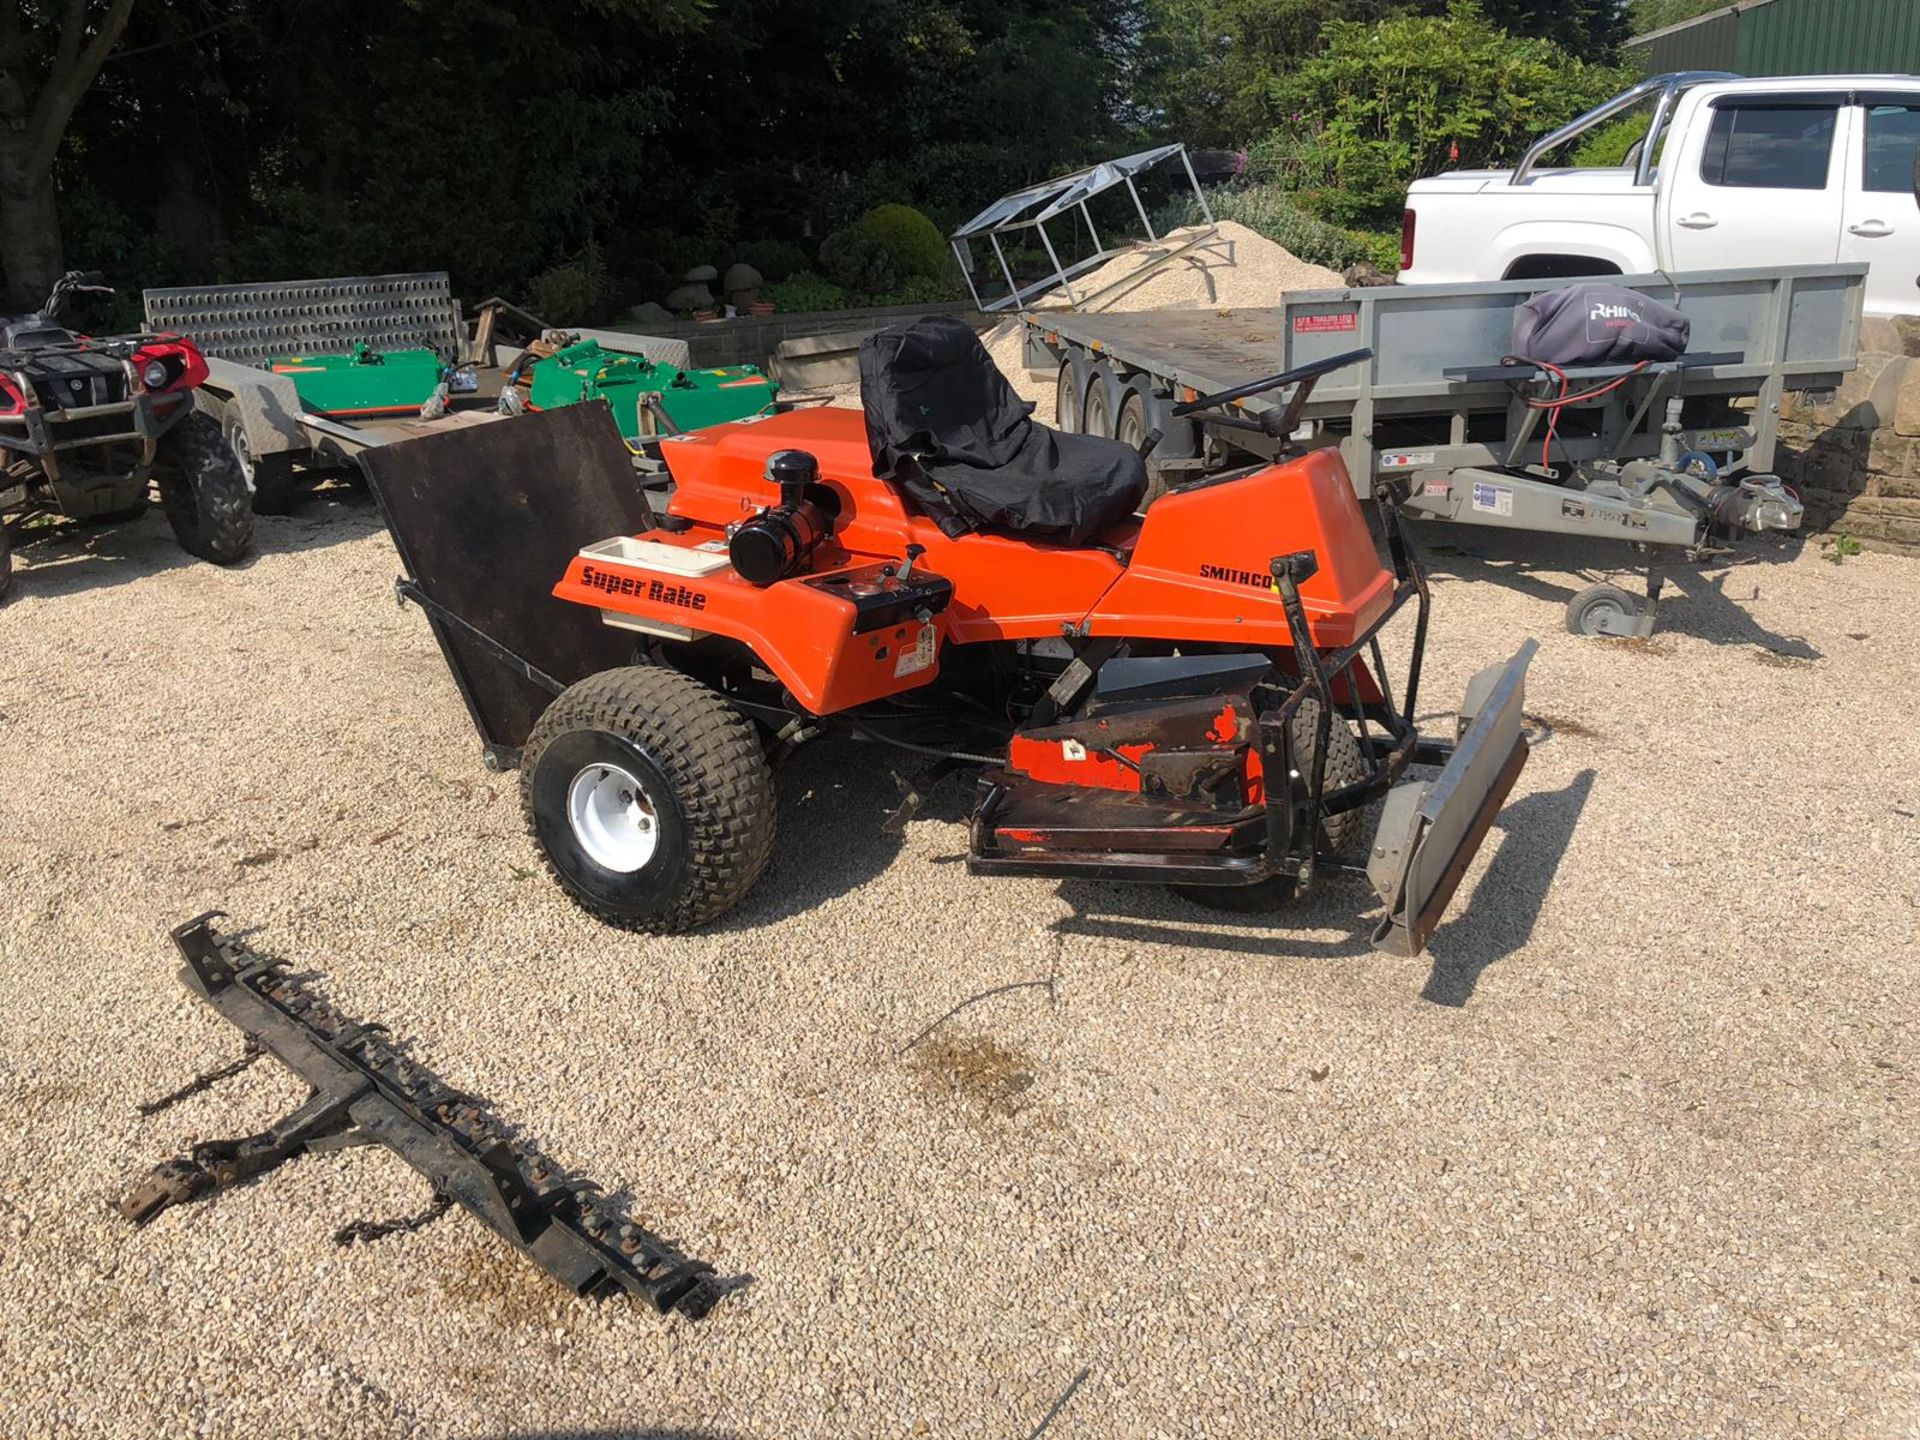 SMITHCO 3 WHEEL DRIVE SAND RAKE, COME STRAIGHT FROM THE GOLF COURSE, RUNS AND WORKS *NO VAT*